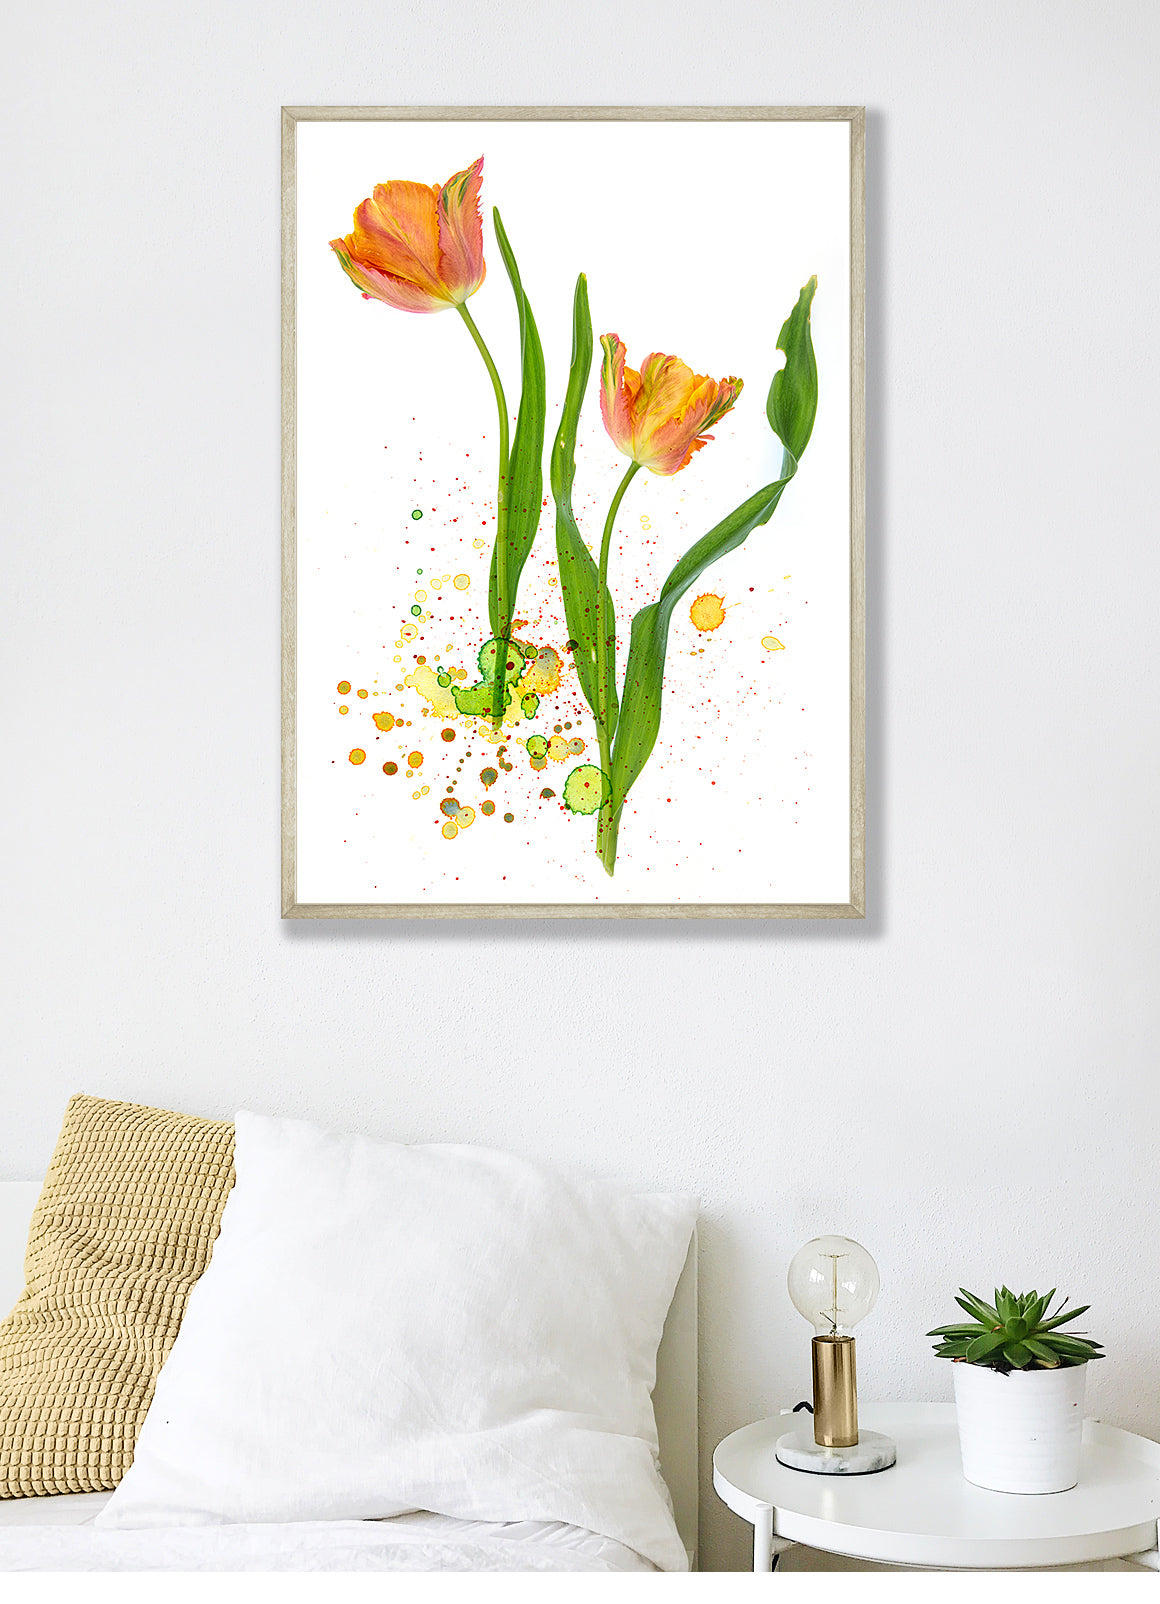 Photograph of tulips using watercolor spatter overlays from the Complete Inspirational Textures and Elements Collection.